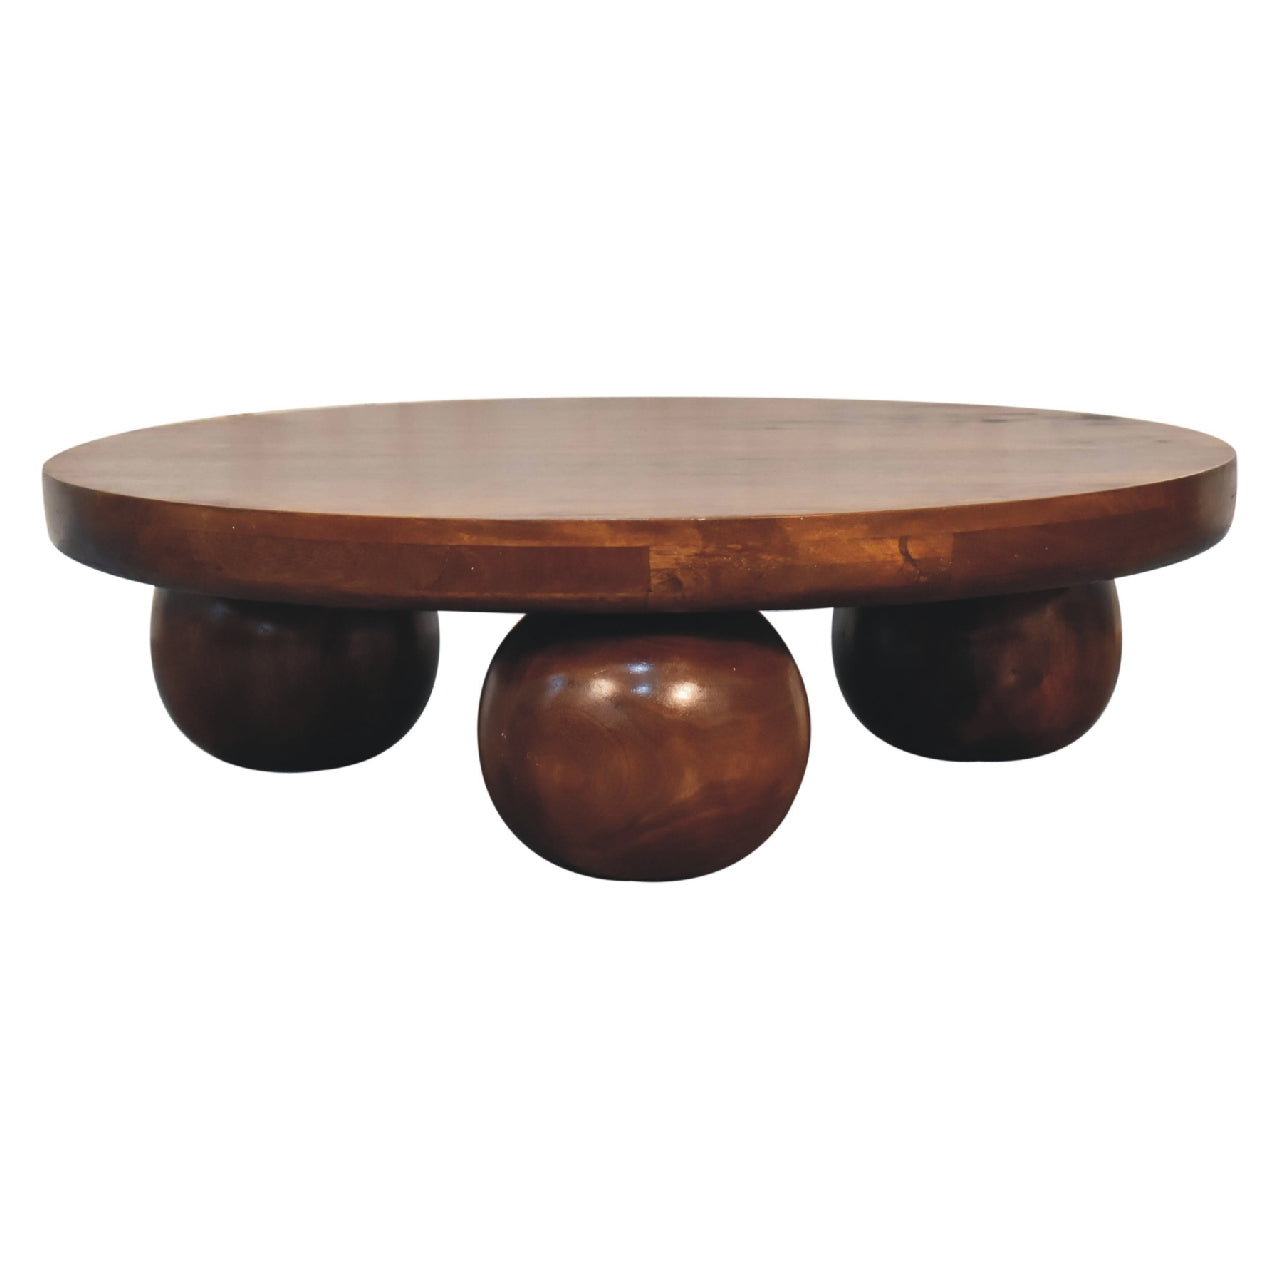 View Chestnut Central Table with Ball Feet information